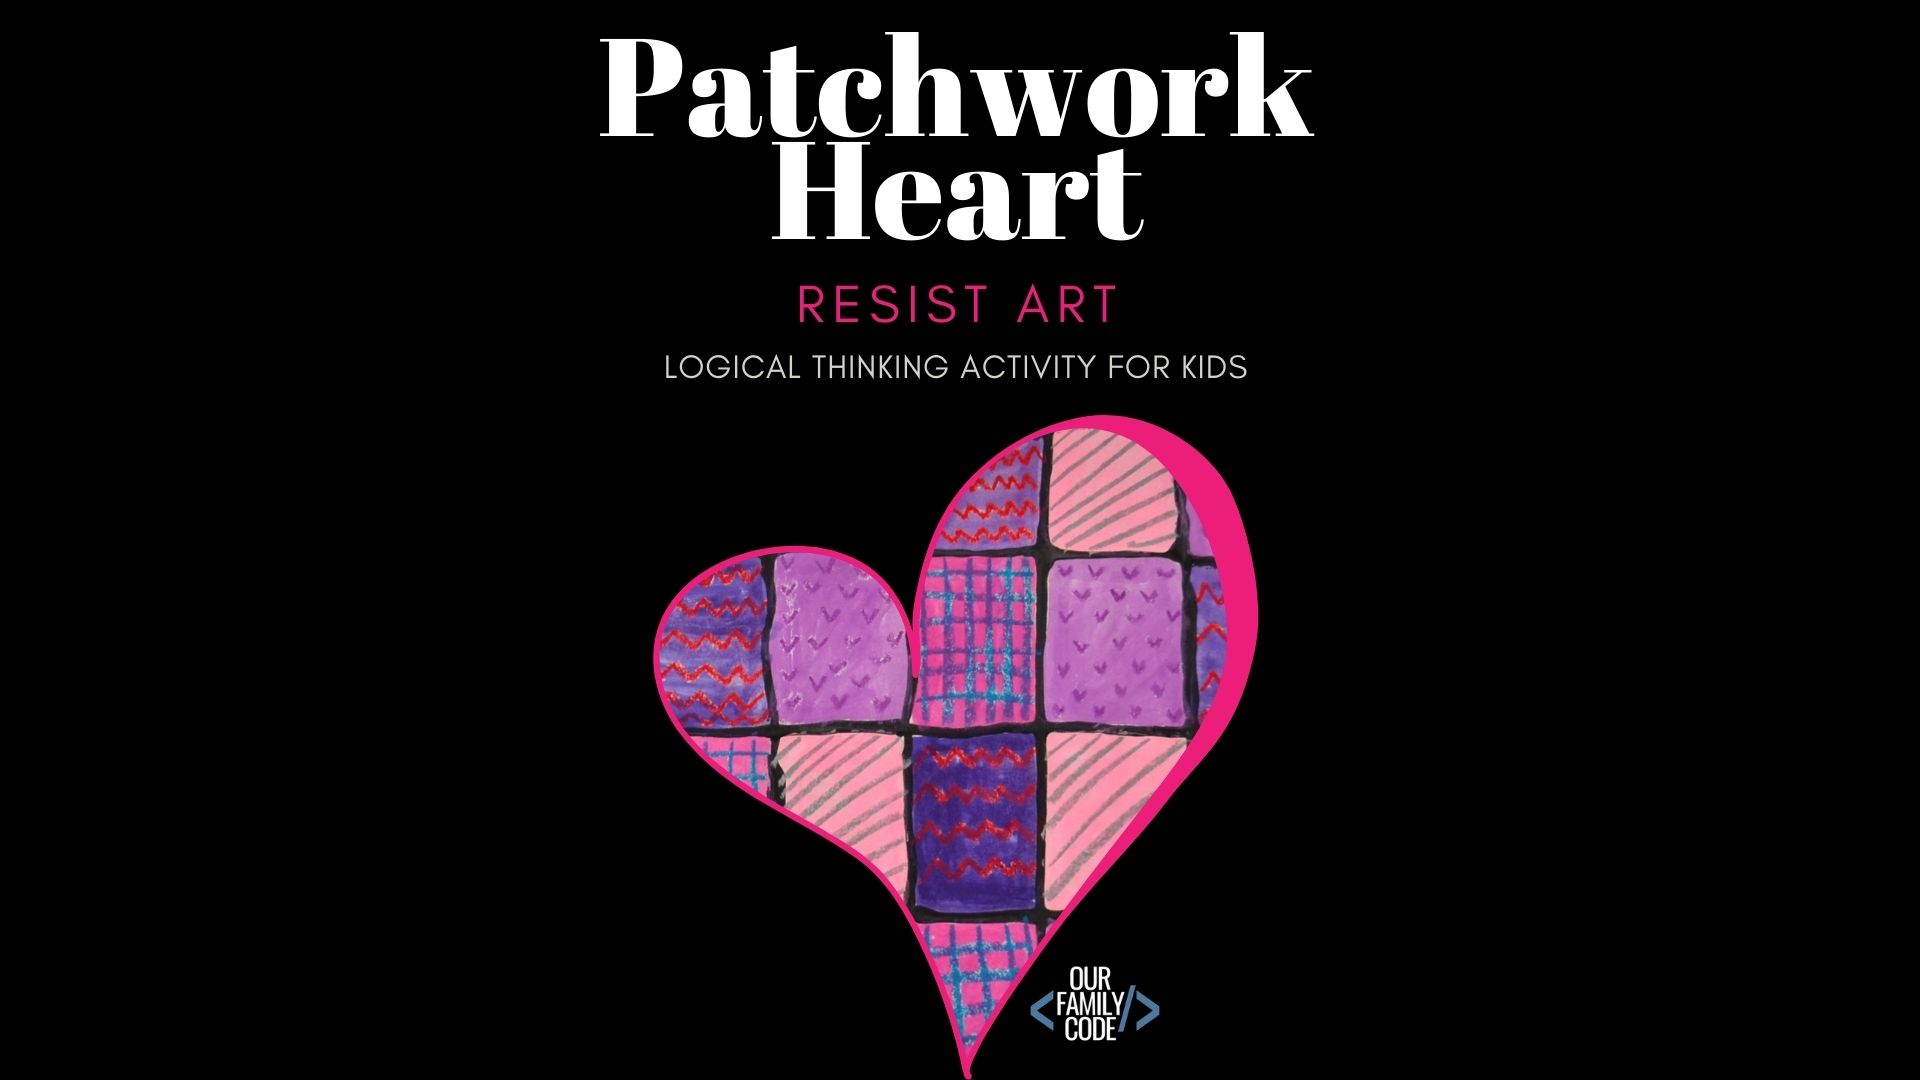 BH FB Patchwork Heart Resist+Art Logical+Thinking+Activity+for+Kids